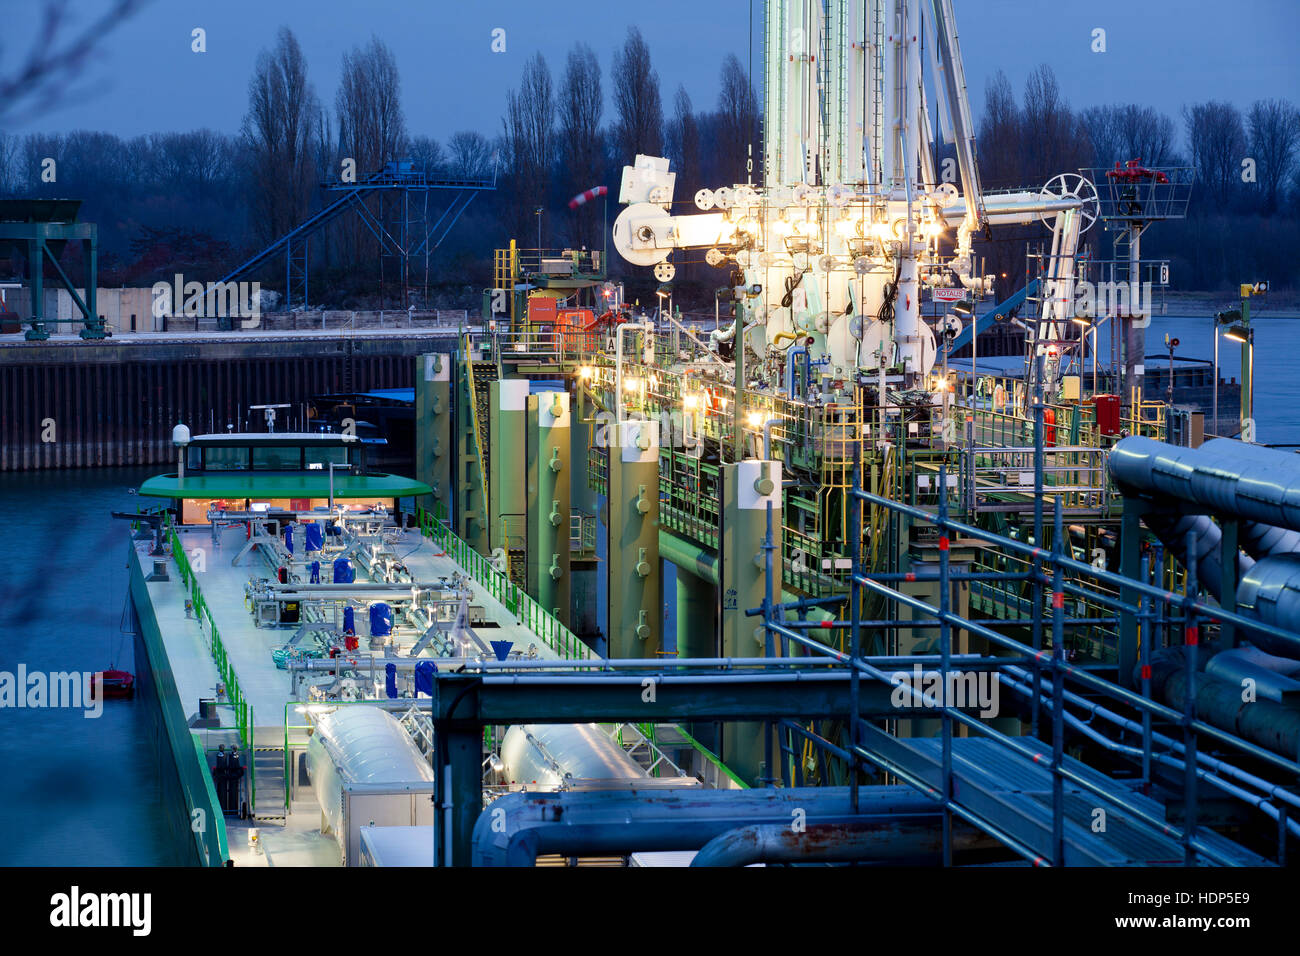 Germany, Cologne, harbor Cologne-Godorf, tanker at a loading plant for flammable liquid goods Stock Photo